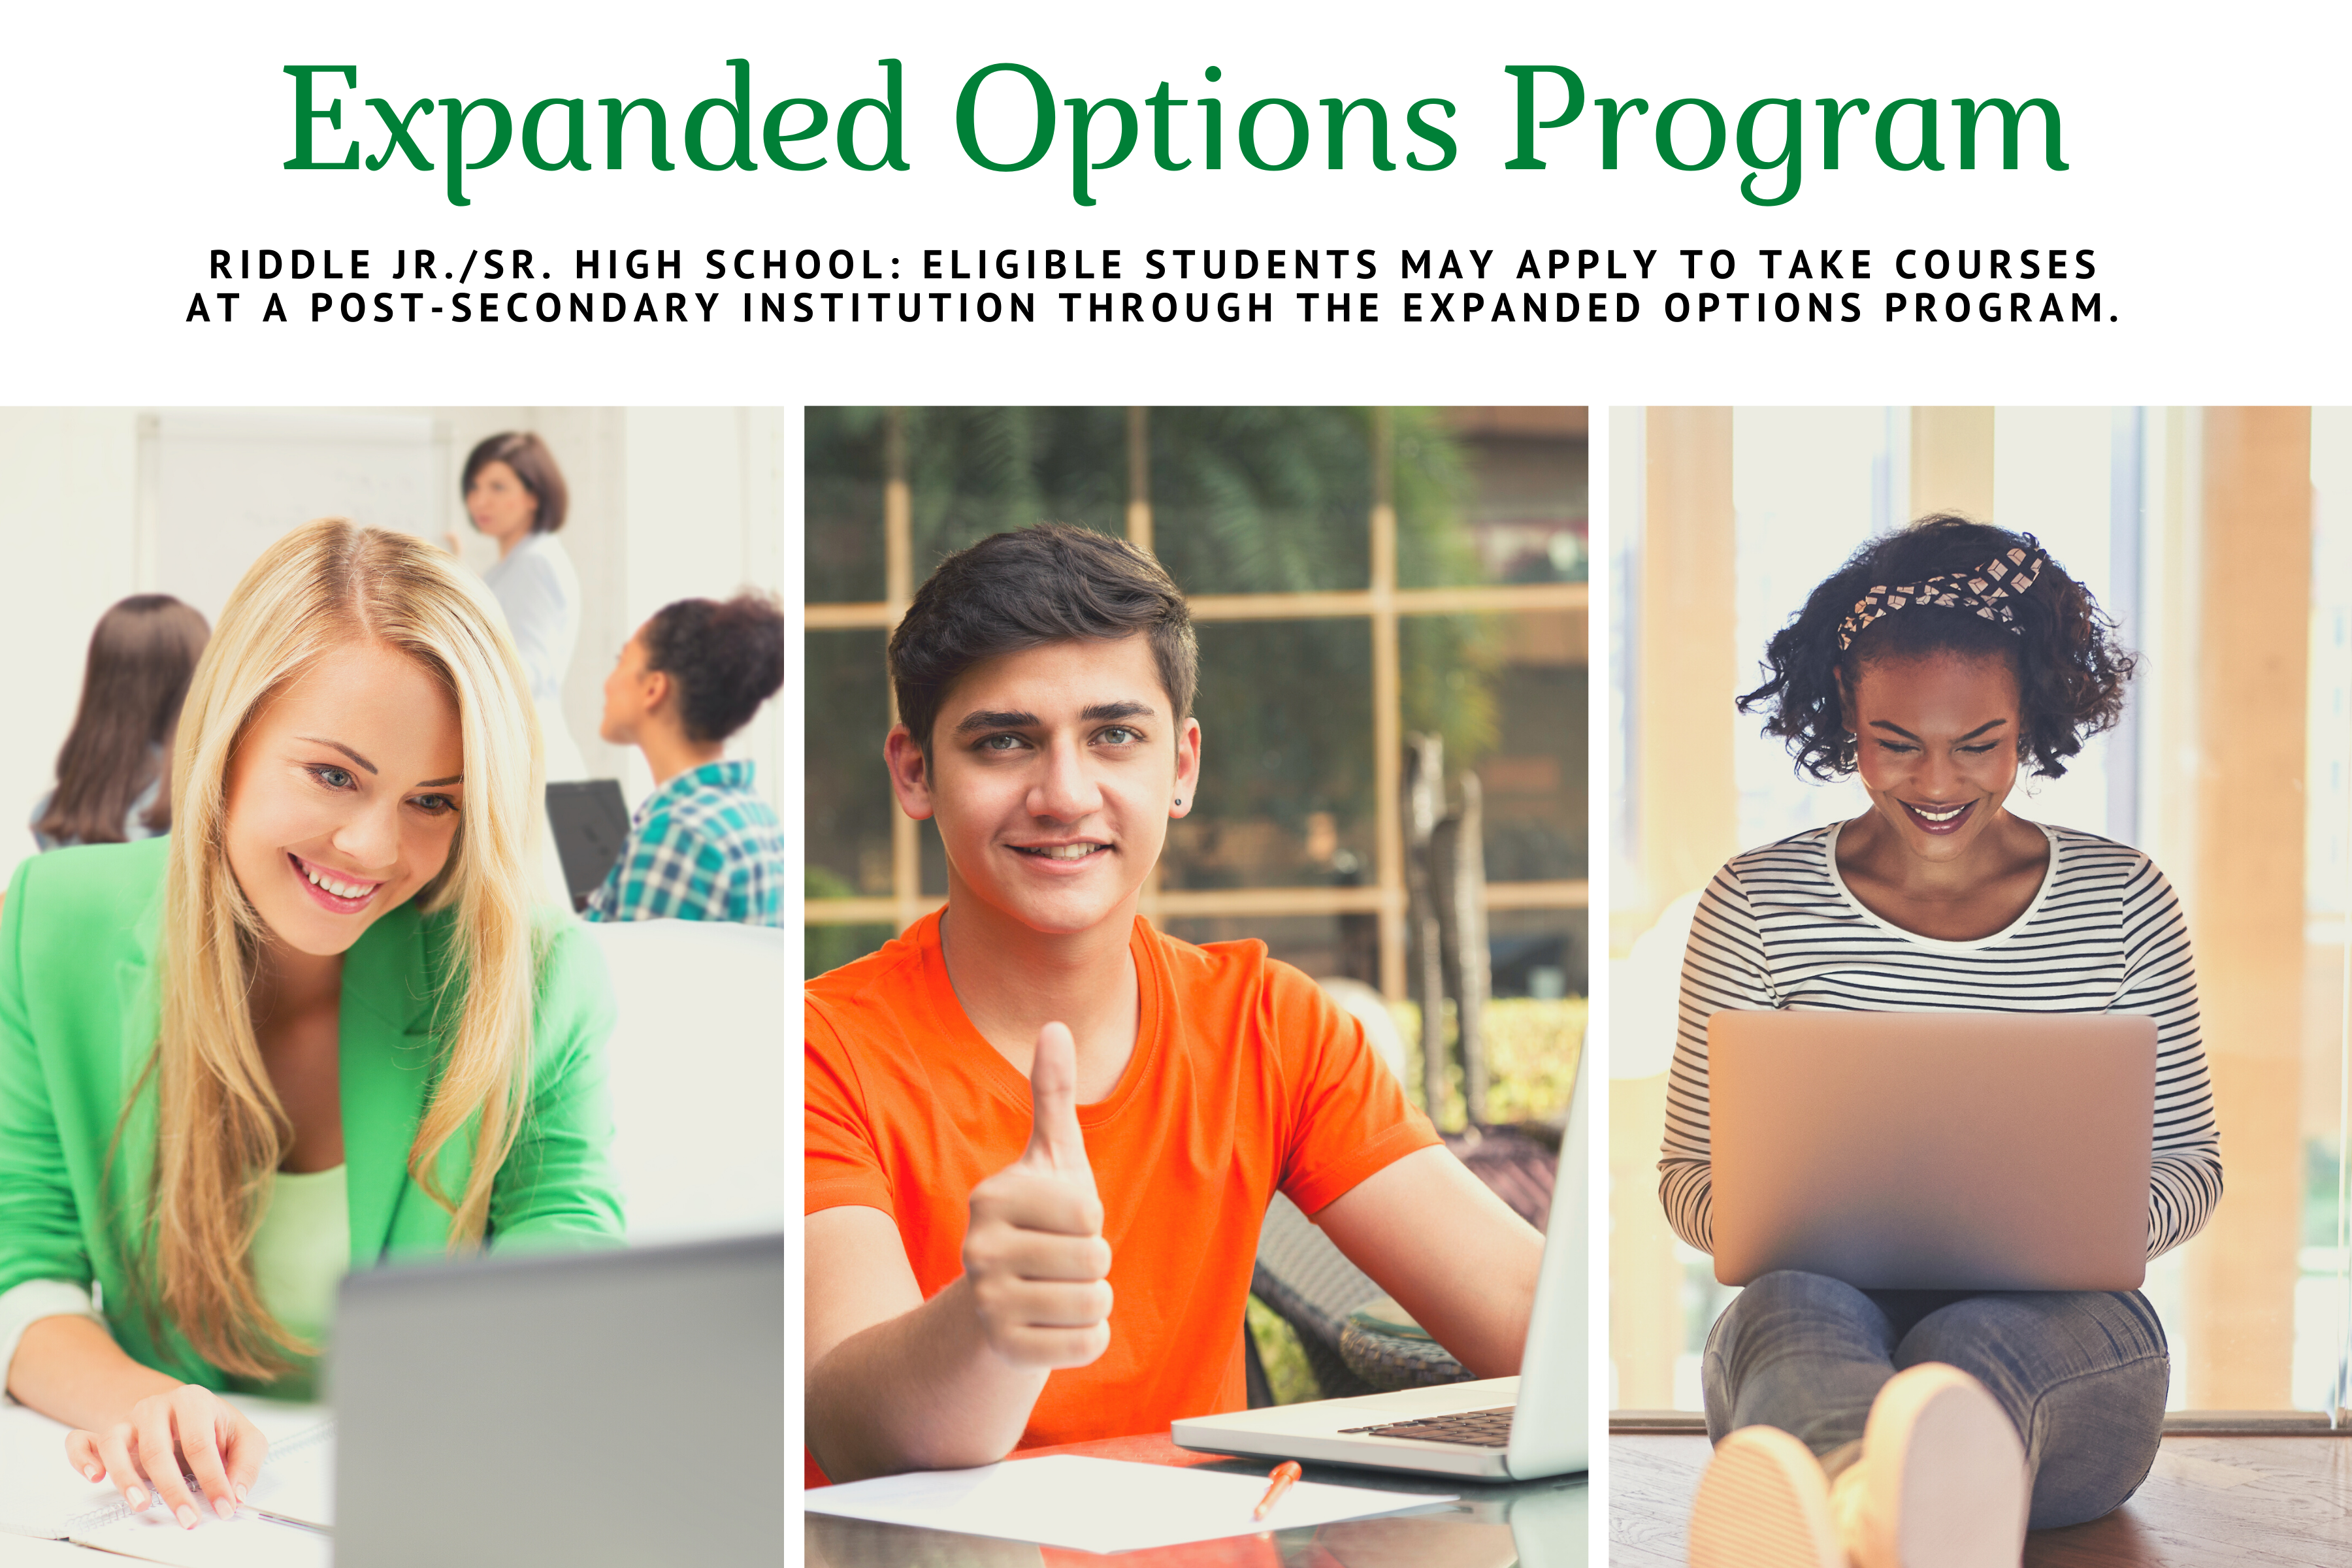 Expanded Options Program image with three students on laptop.